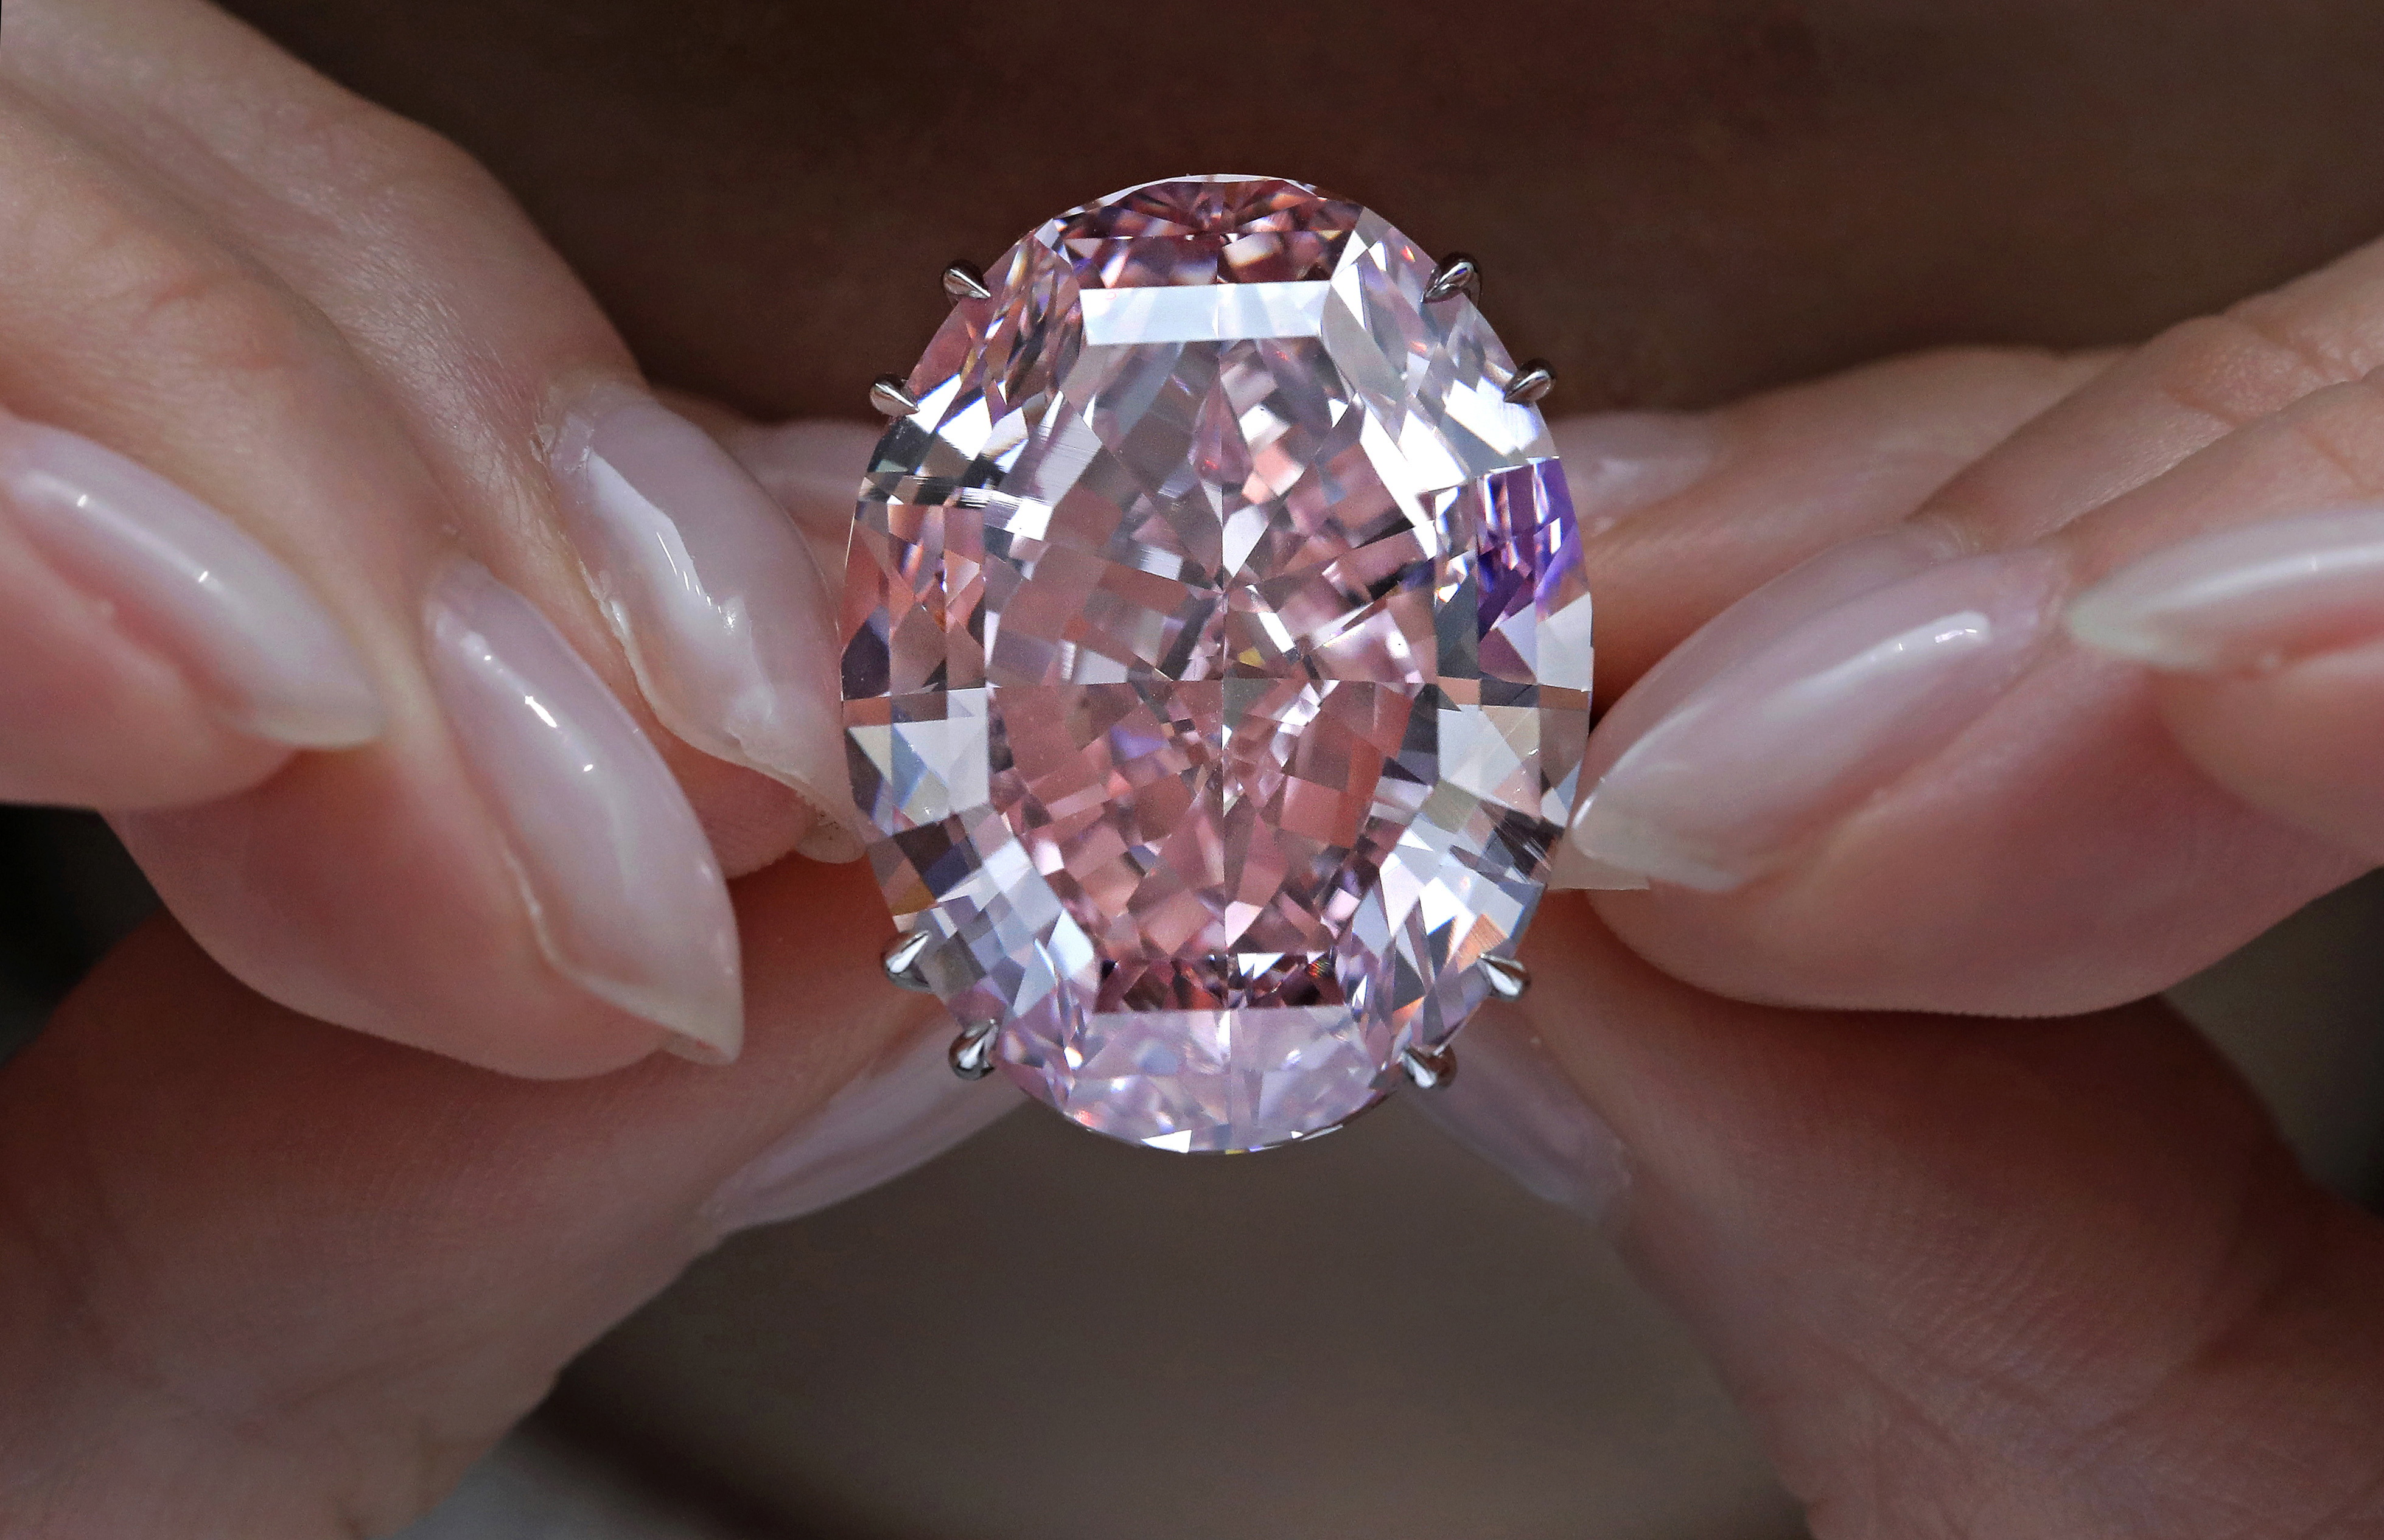 The "Pink Star" diamond is shown in this March 29, 2017, file photo. (AP Photo/Vincent Yu)